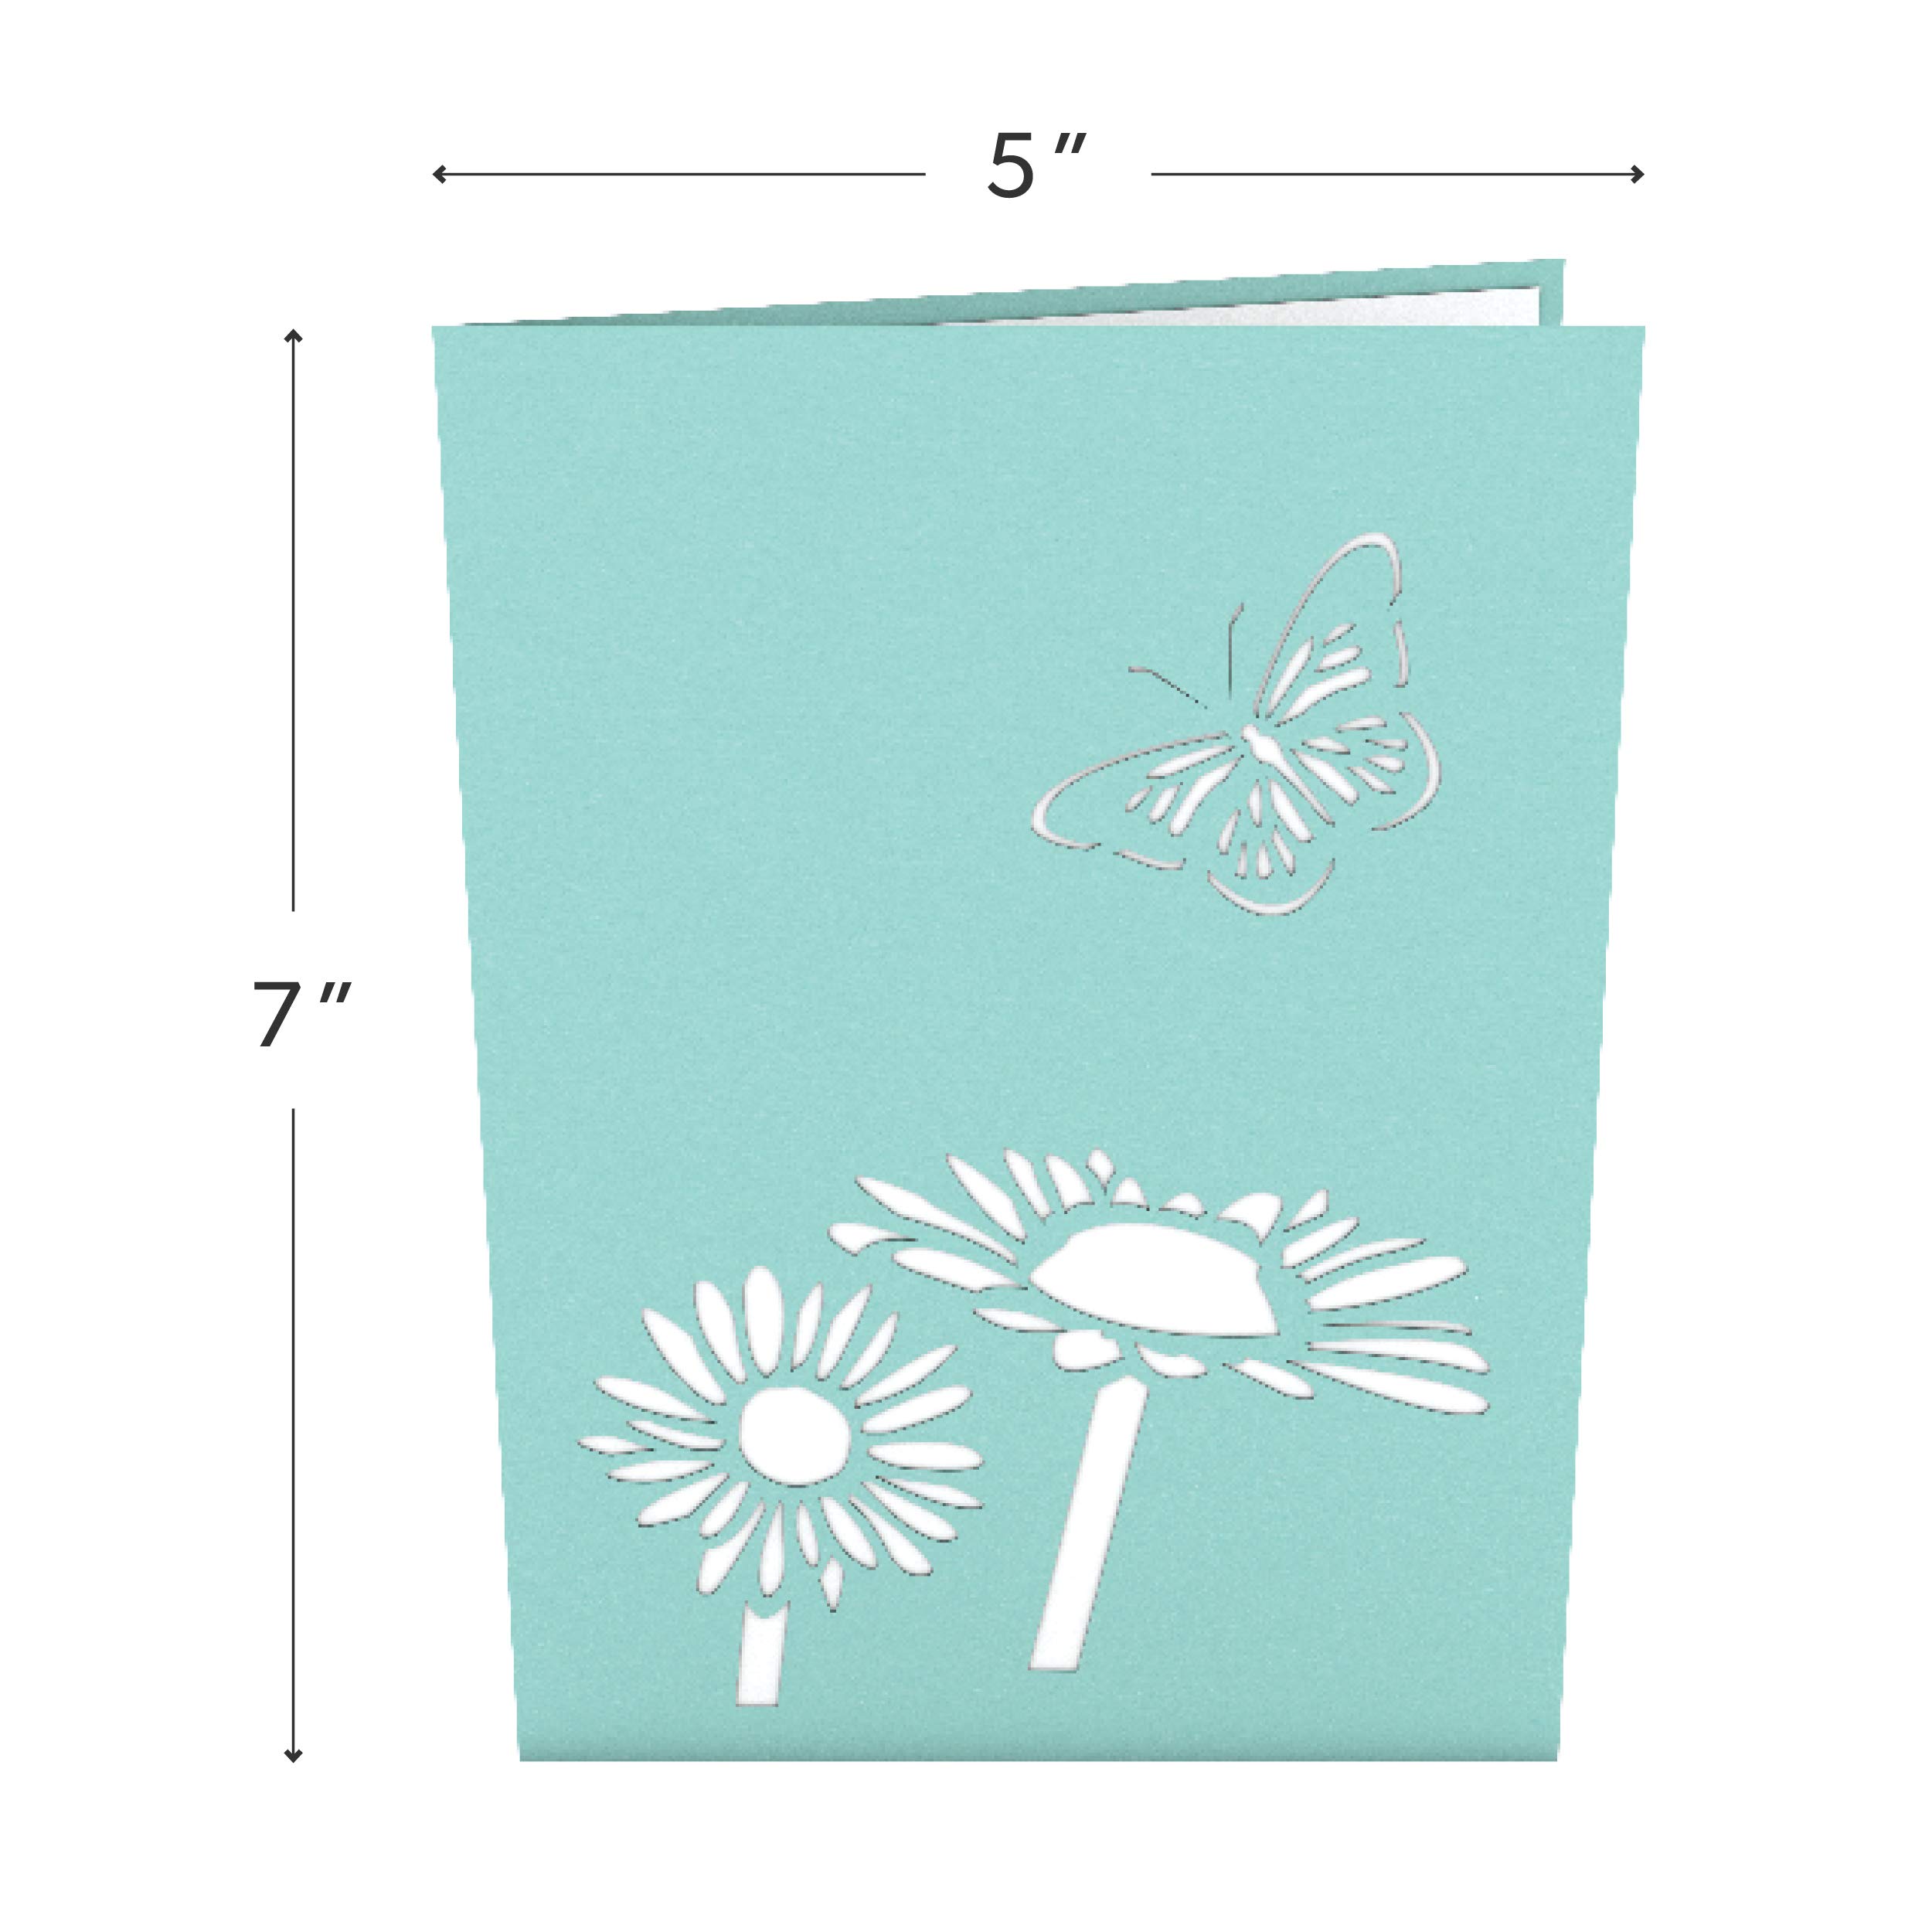 Lovepop Daisy Patch Pop Up Card - 3D Card, Greeting Card, Flower Card, Anniversary Card, Mother's Day Card, Birthday Card, Appreciation Card (Retiring Design)